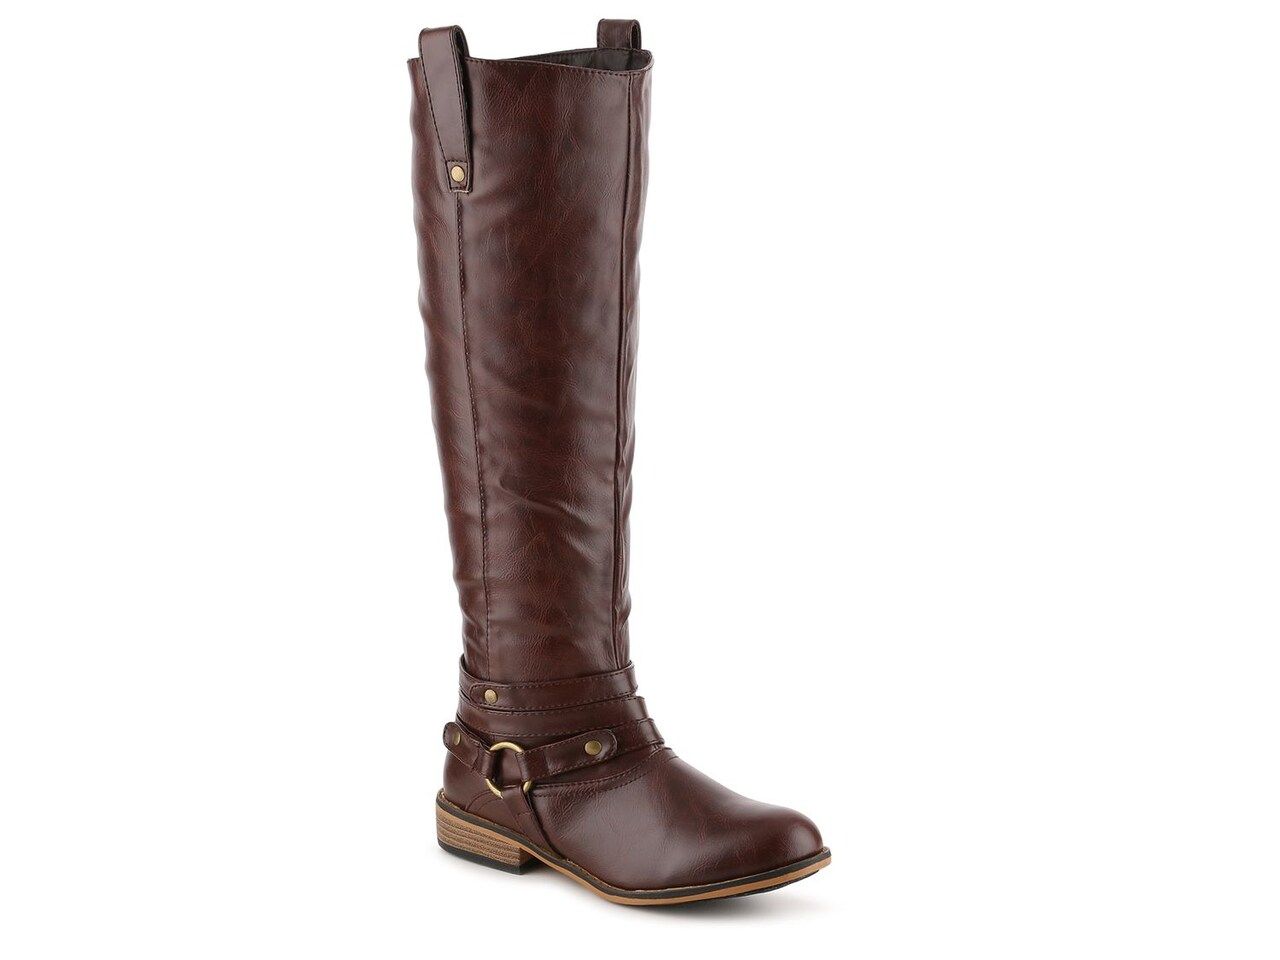 Journee Collection Walla Extra Wide Calf Riding Boot | DSW